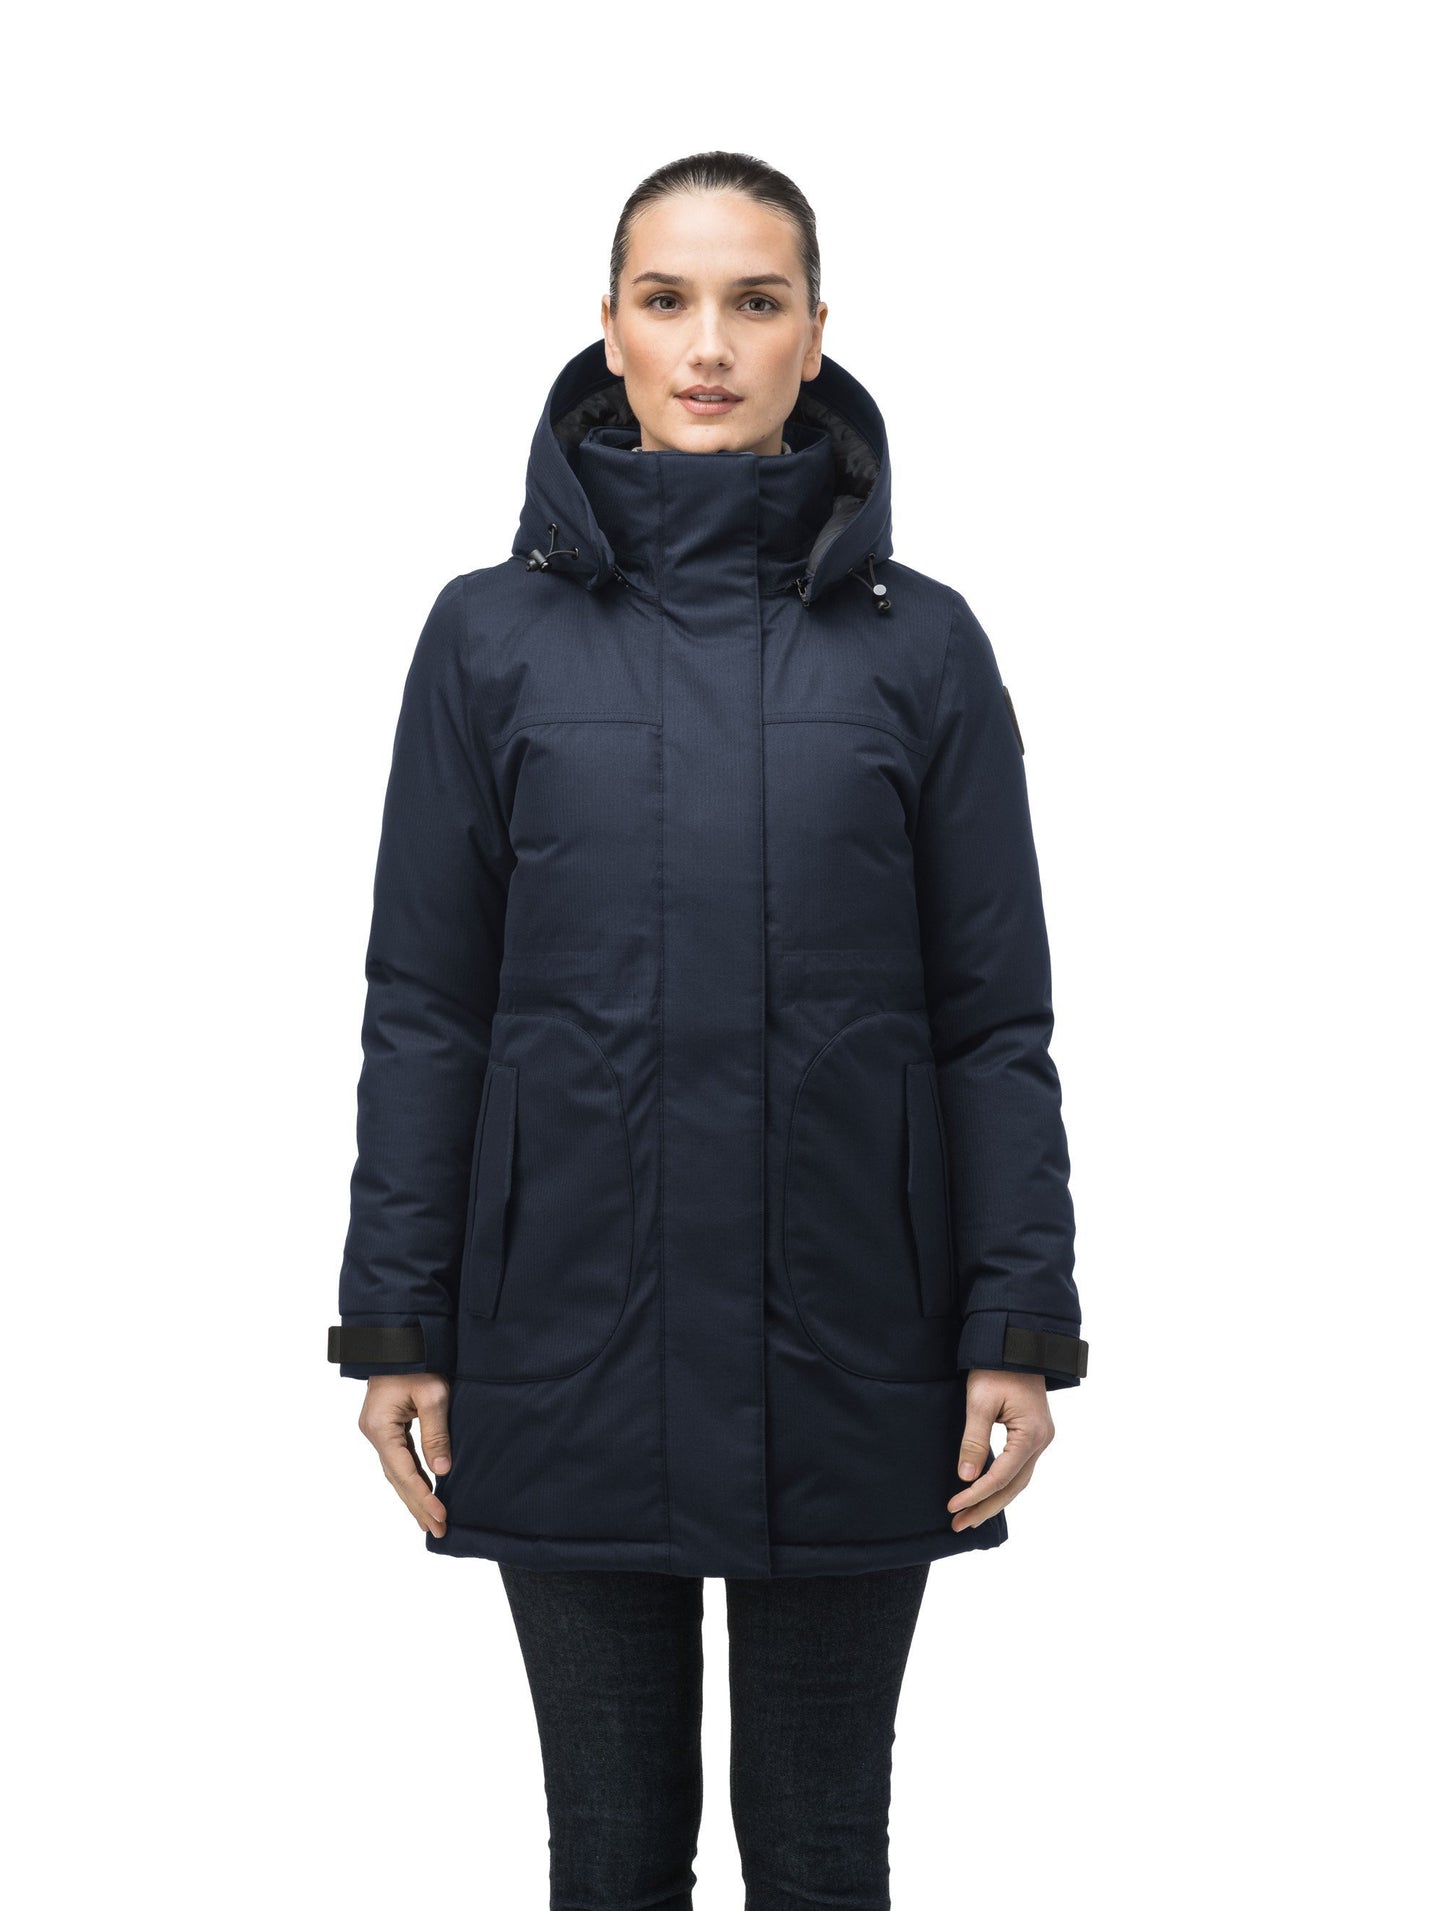 Thigh length women's down filled parka with side entry pockets and drawcord waist, removable hood and fur trim in Navy